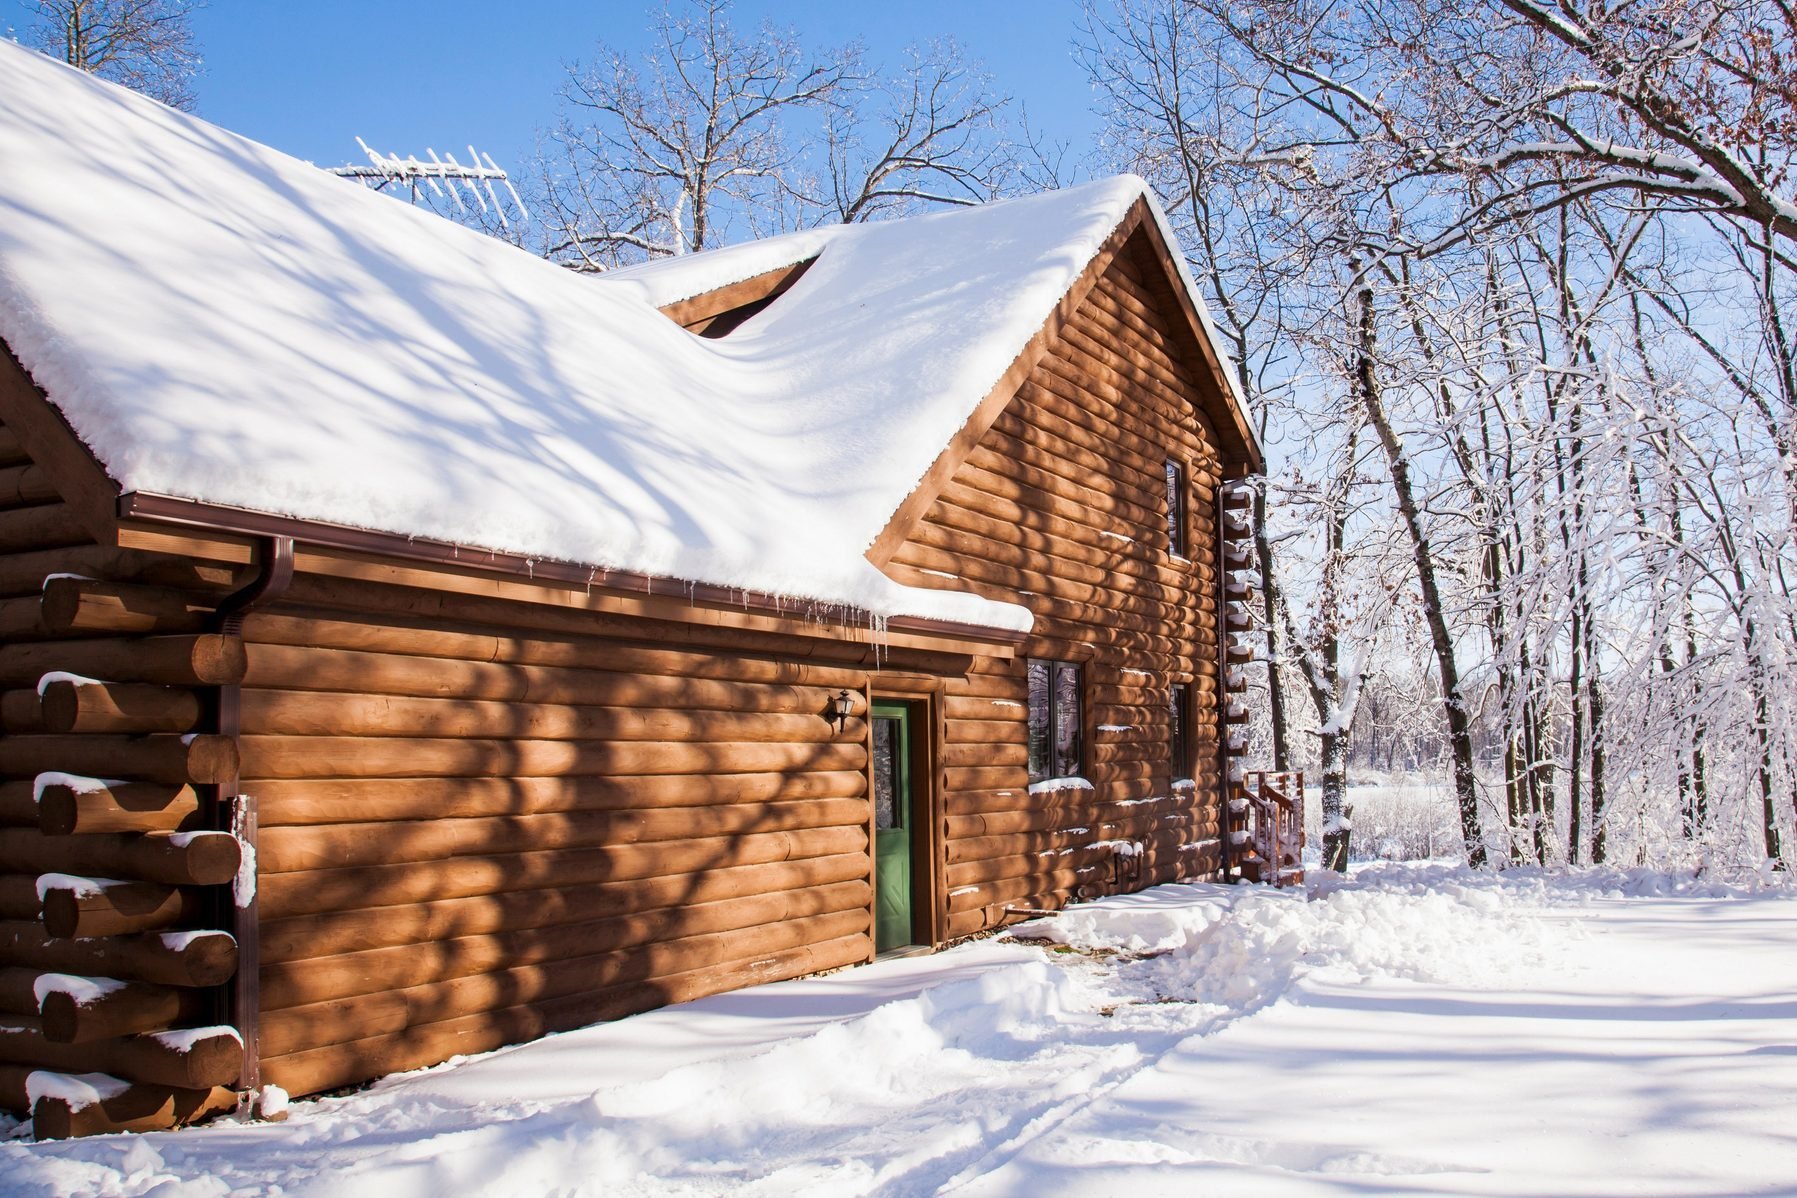 How To Keep Pipes From Freezing At Your Cabin